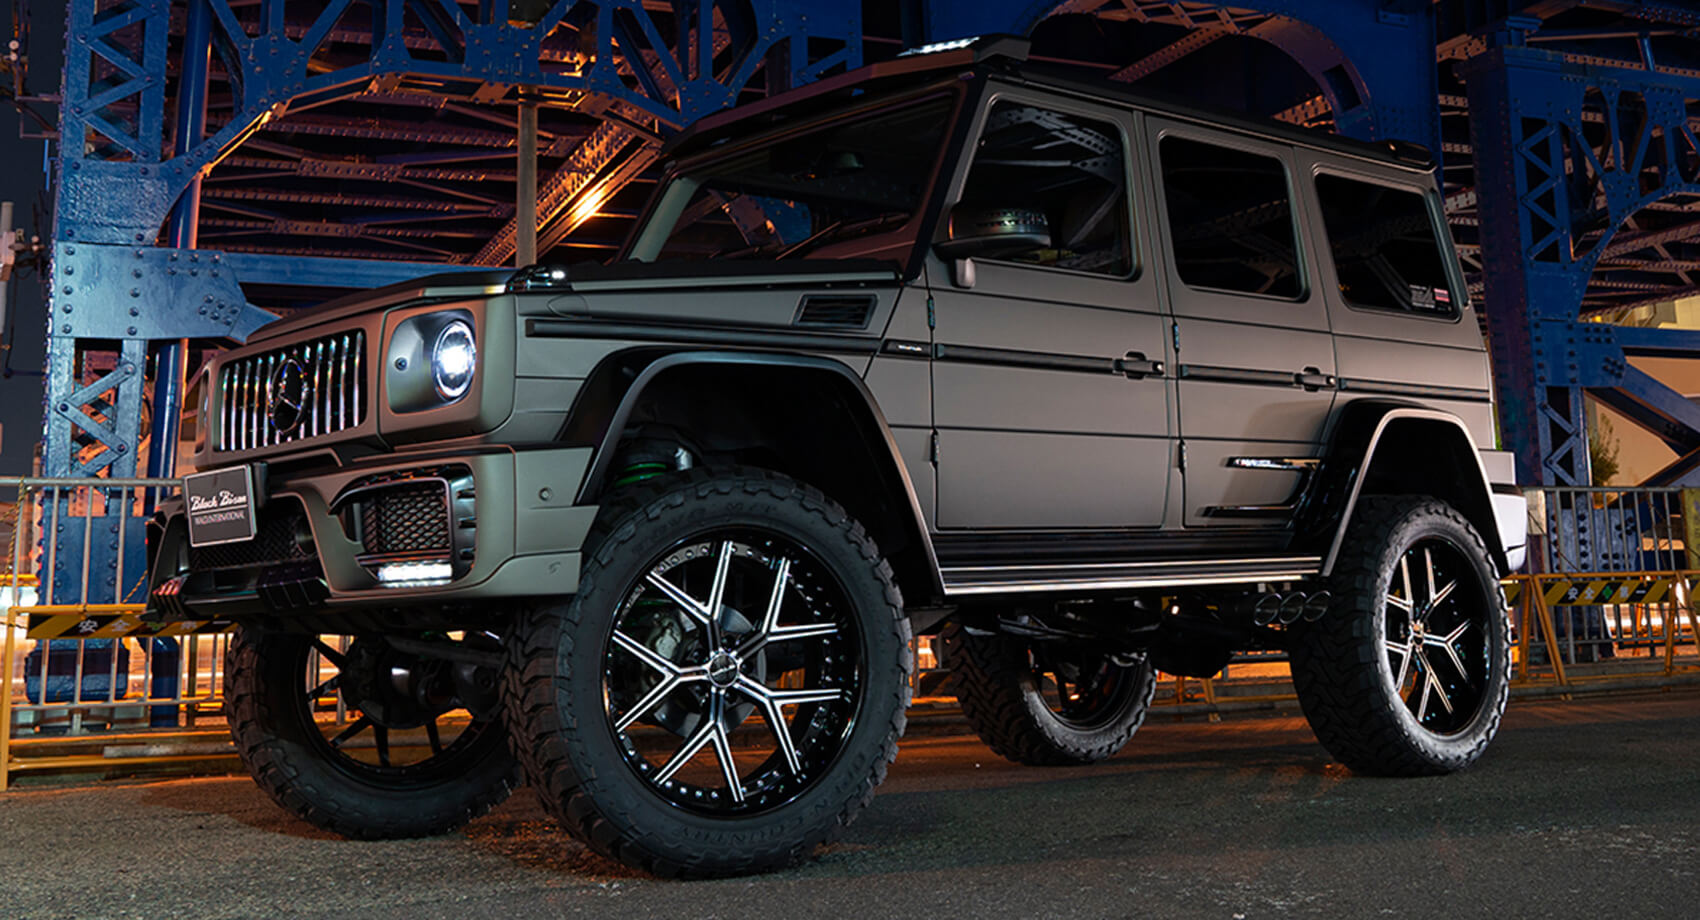 Wald Makes The Old Mercedes-Benz G-Class Look Like The New AMG G63 |  Carscoops